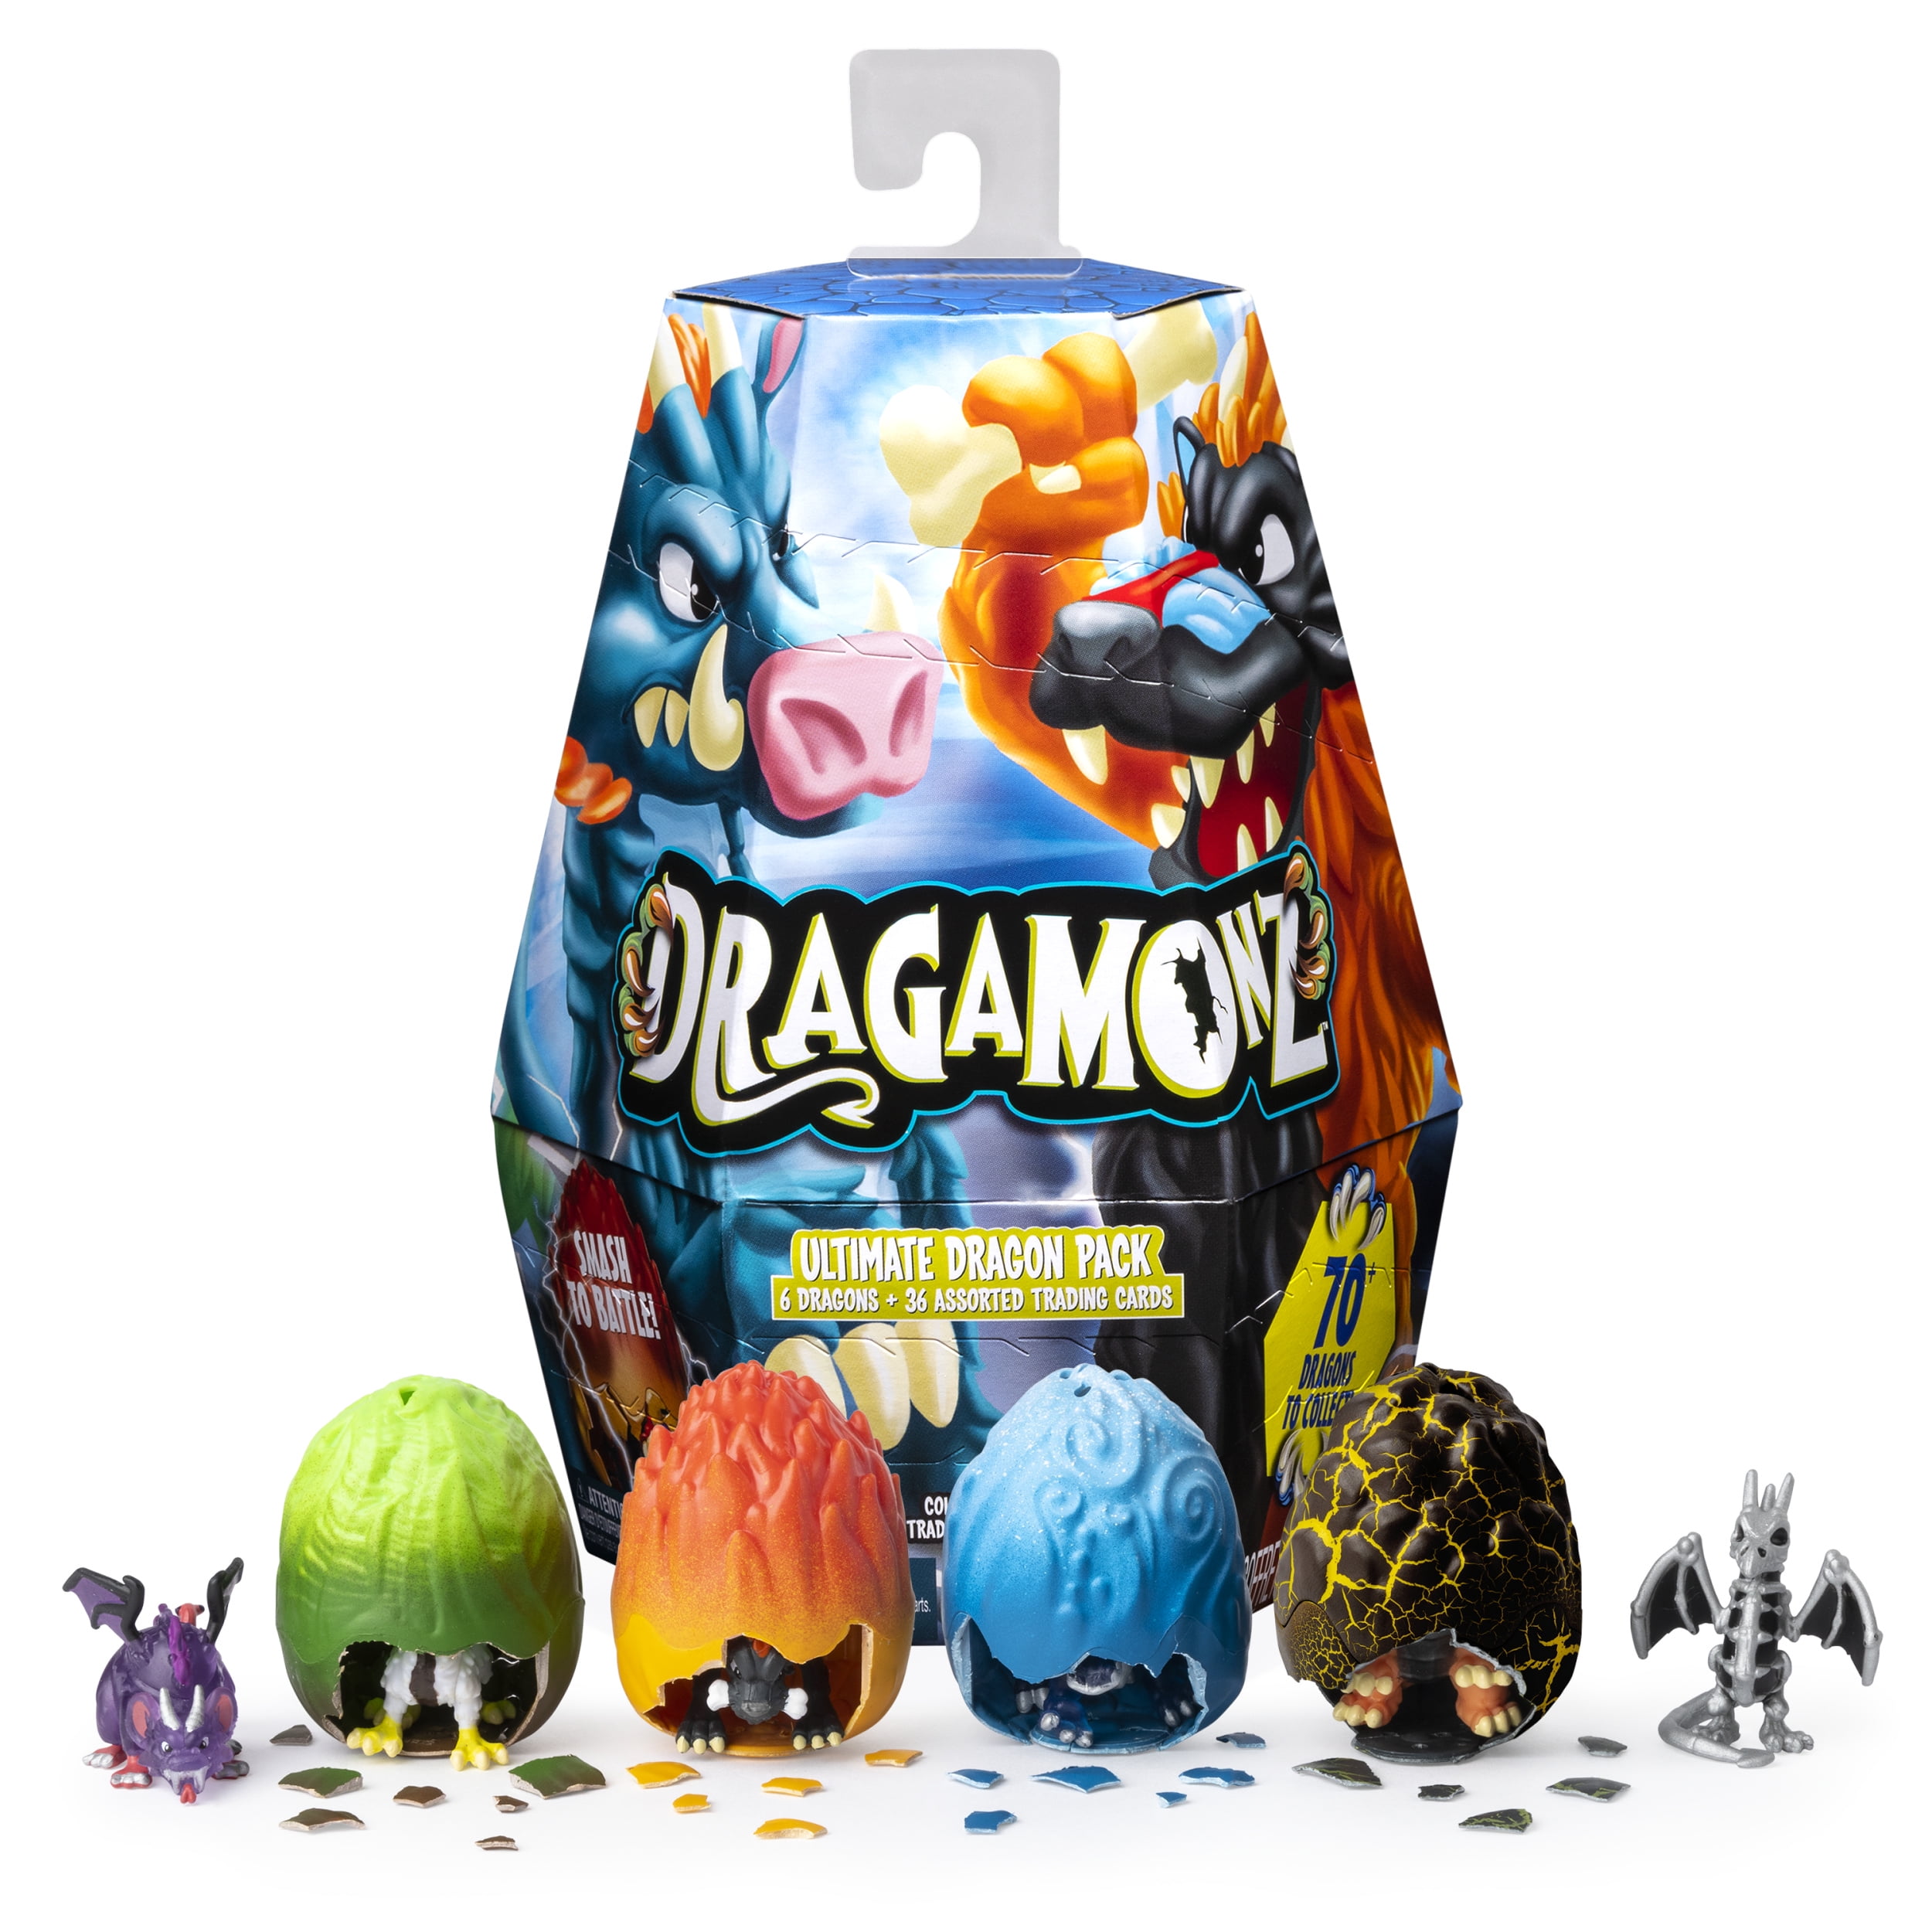 Details about   Dragamonz Dragon 1-Pack Lot of 3 NEW Collectible Figure & Trading Card Game 